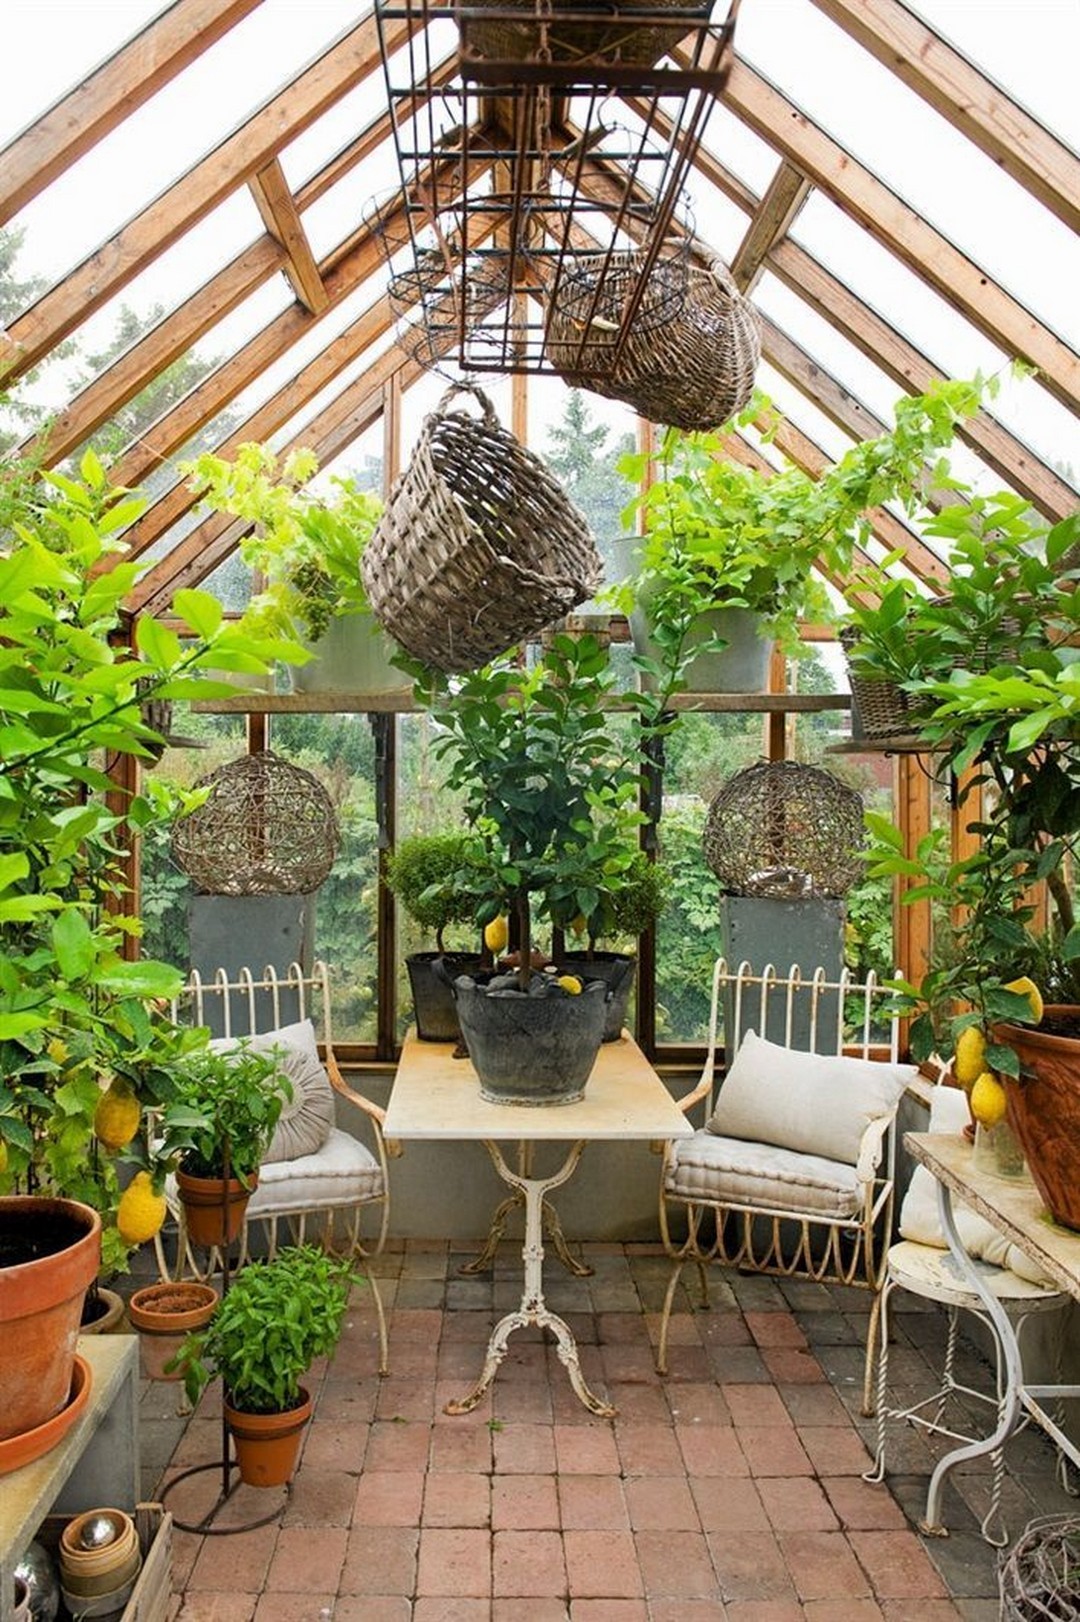 greenhouse indoor garden interior decor small luxury interiors houses backyard shed sheds green greenhouses potting trendiest stunning look she designs